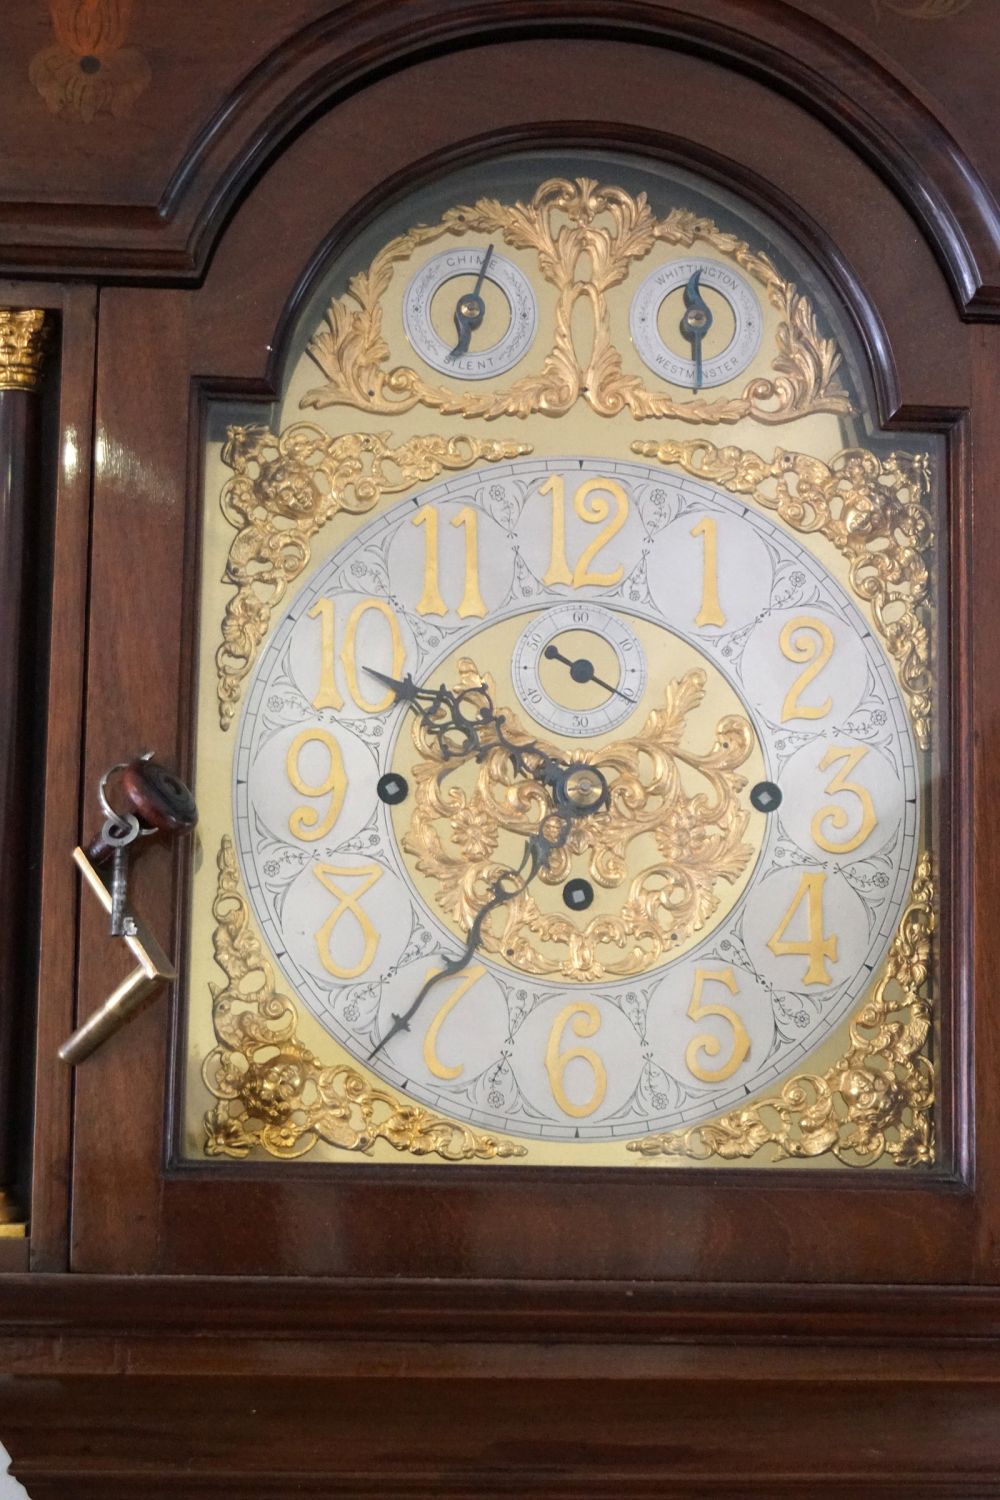 EDWARDIAN MARQUETRY LONG CASE CLOCK - Image 4 of 5